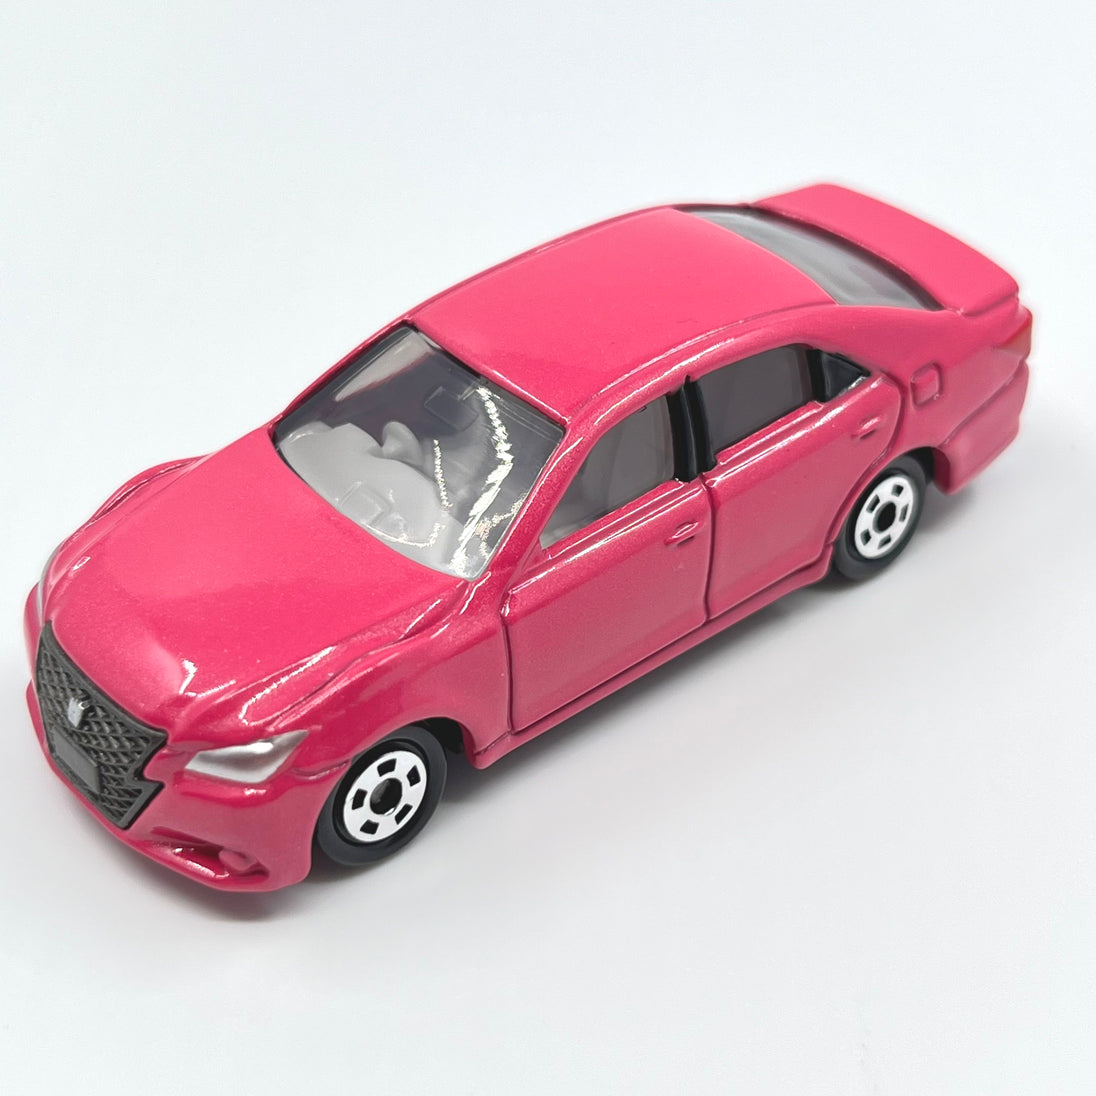 1:66 Toyota Crown Athlete Alloy Tomica Diecast Car Model by Takara Tomy